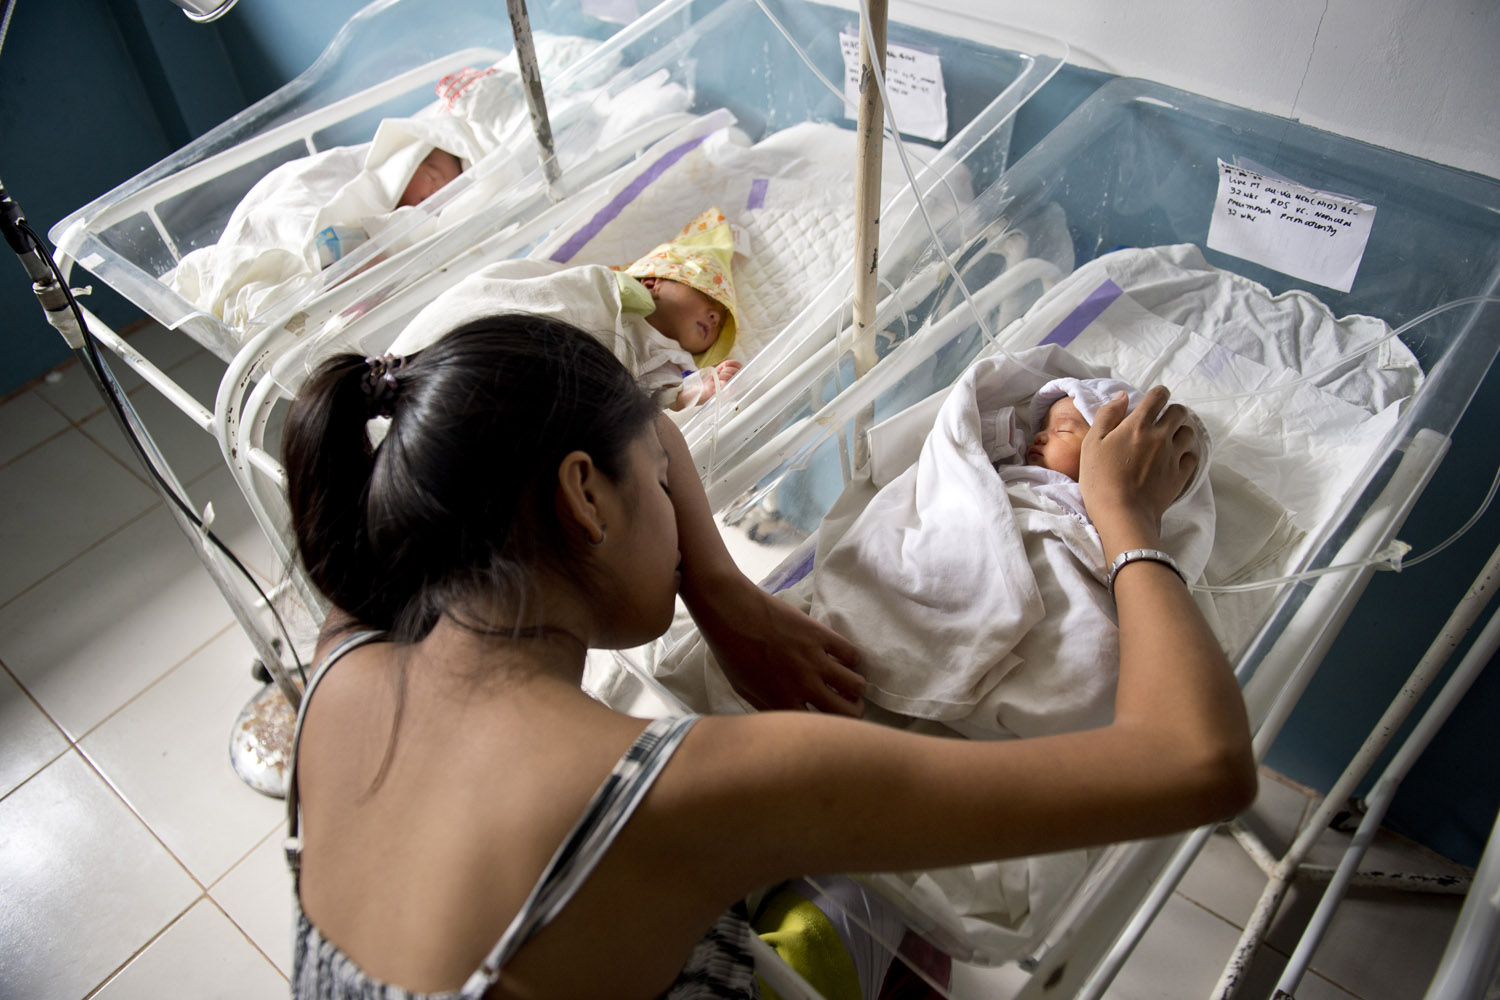 Nov. 20, 2013. The mother of premature baby Vothuan rests sitting by her cot in the children's and maternity ward at the Eastern Visayas Medical Centre in Tacloban, Philippines.